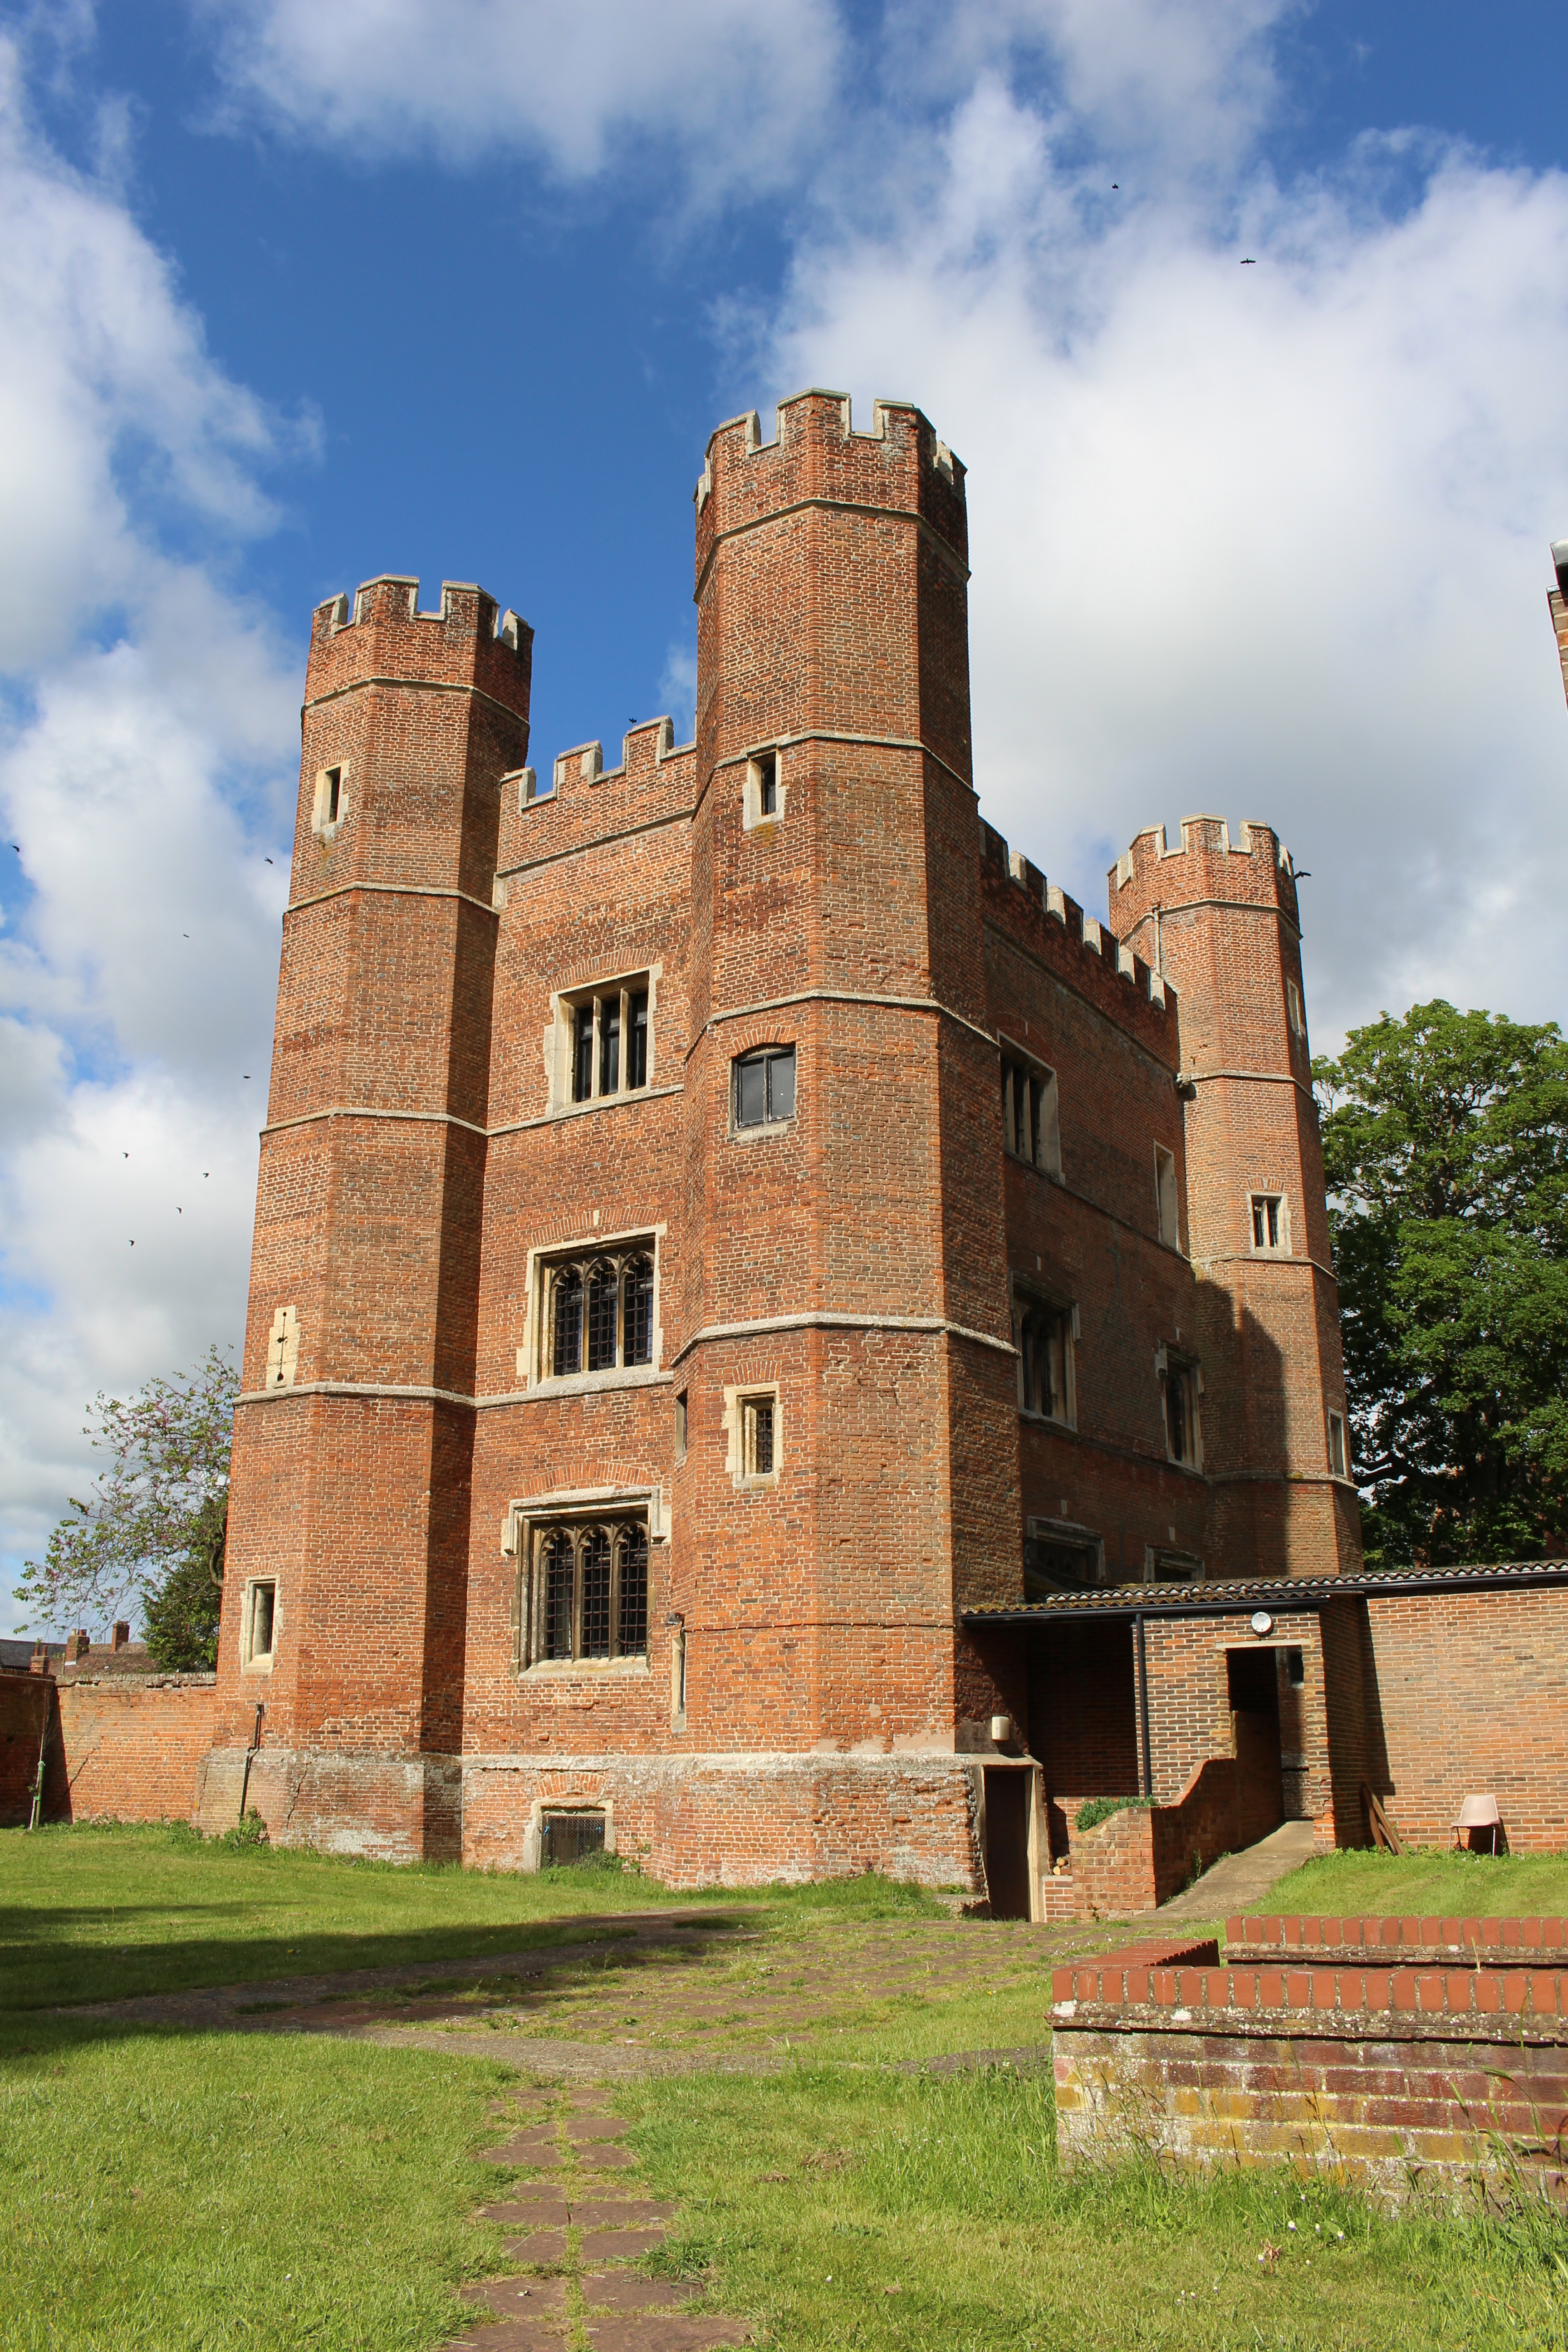 The Tower House At Buckden Palace